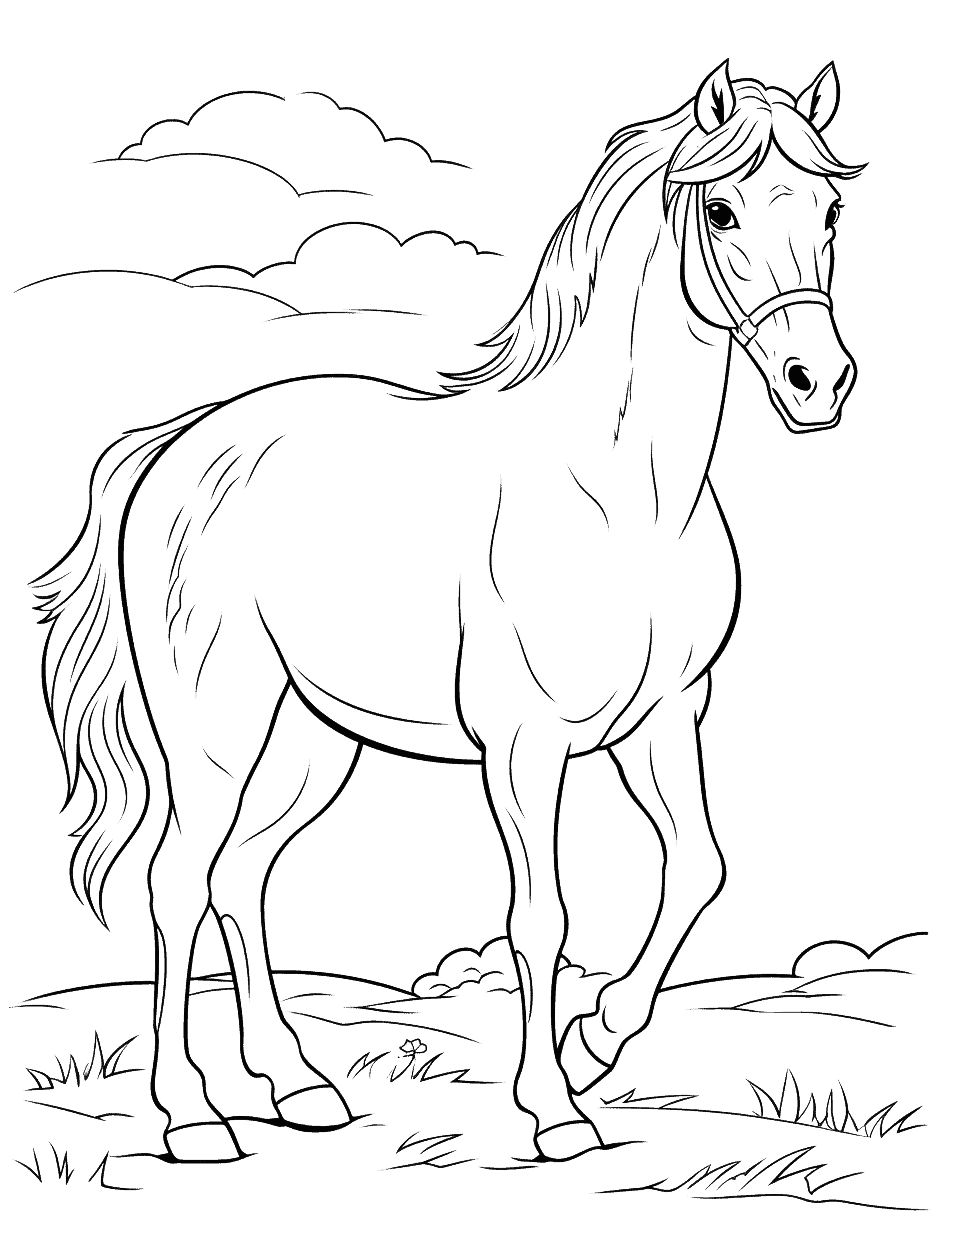 Easy Horse Sketch Coloring Page - An easy horse sketch for kids to color and learn the basics of drawing.